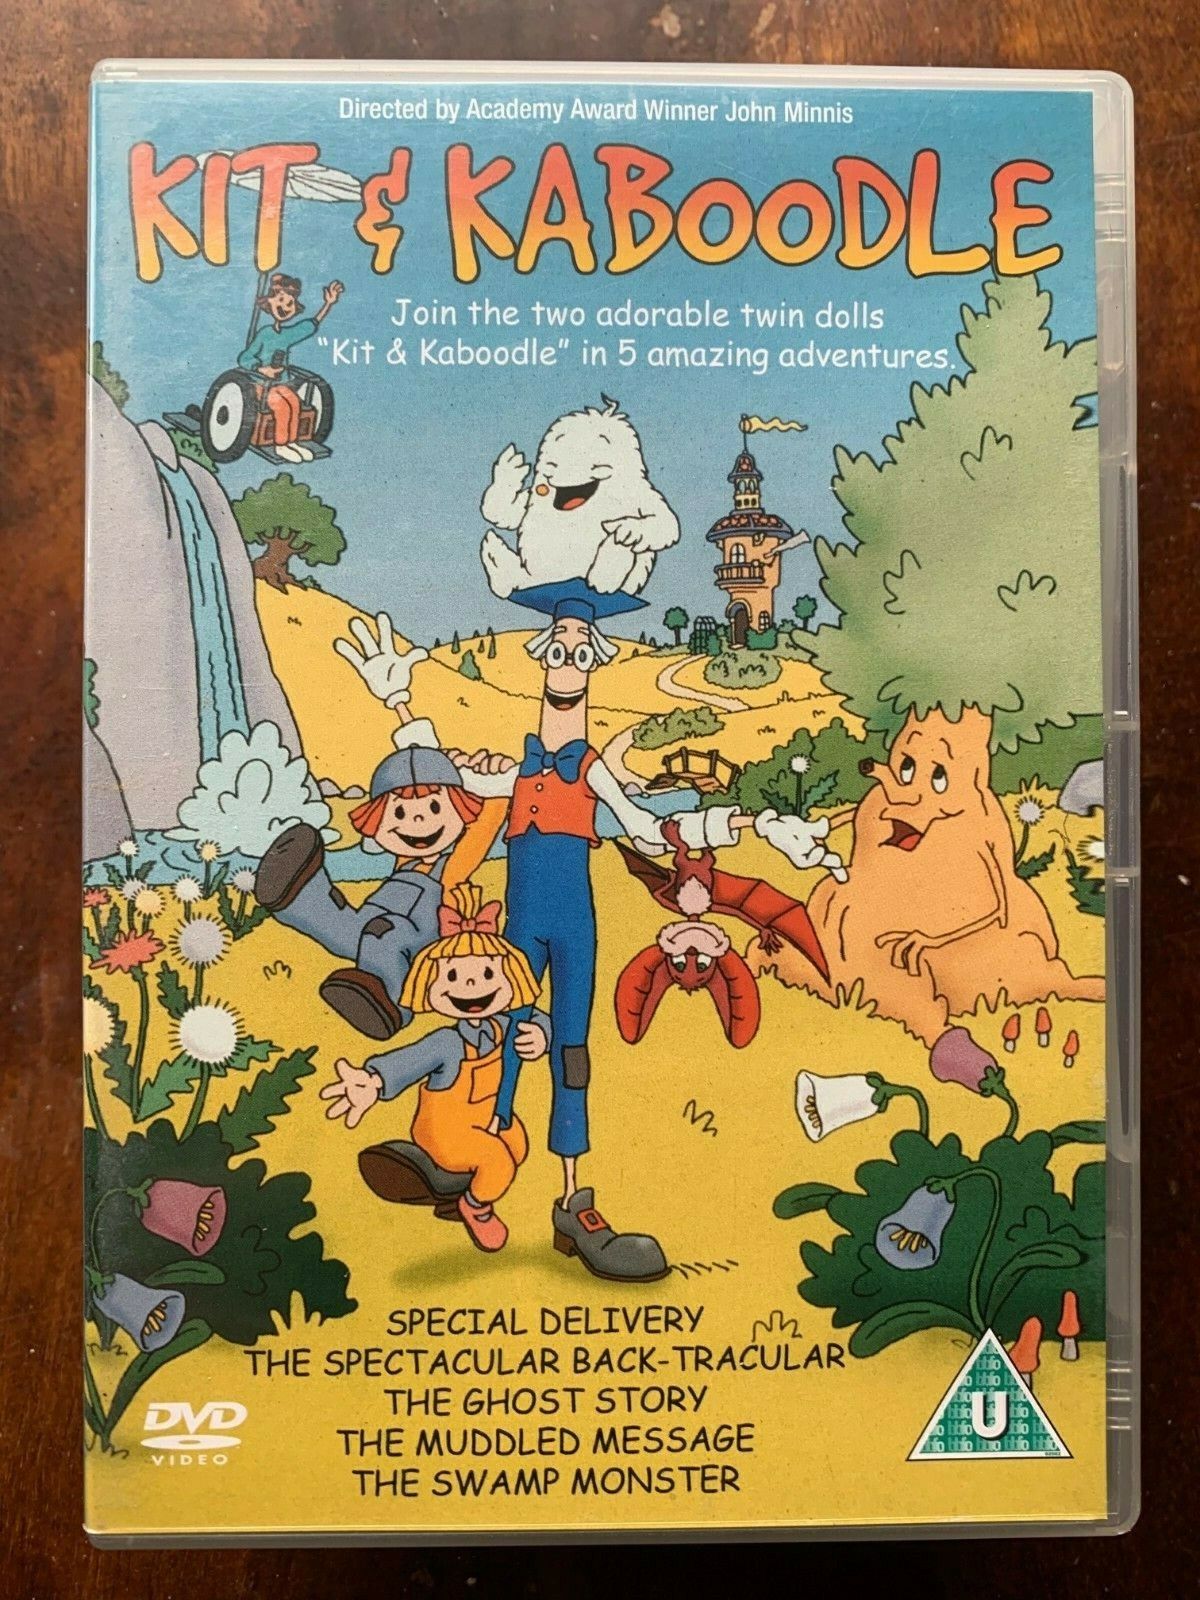 Kit and Kaboodle DVD Animated Family Movie directed by John Minnis  5029248105365 | eBay